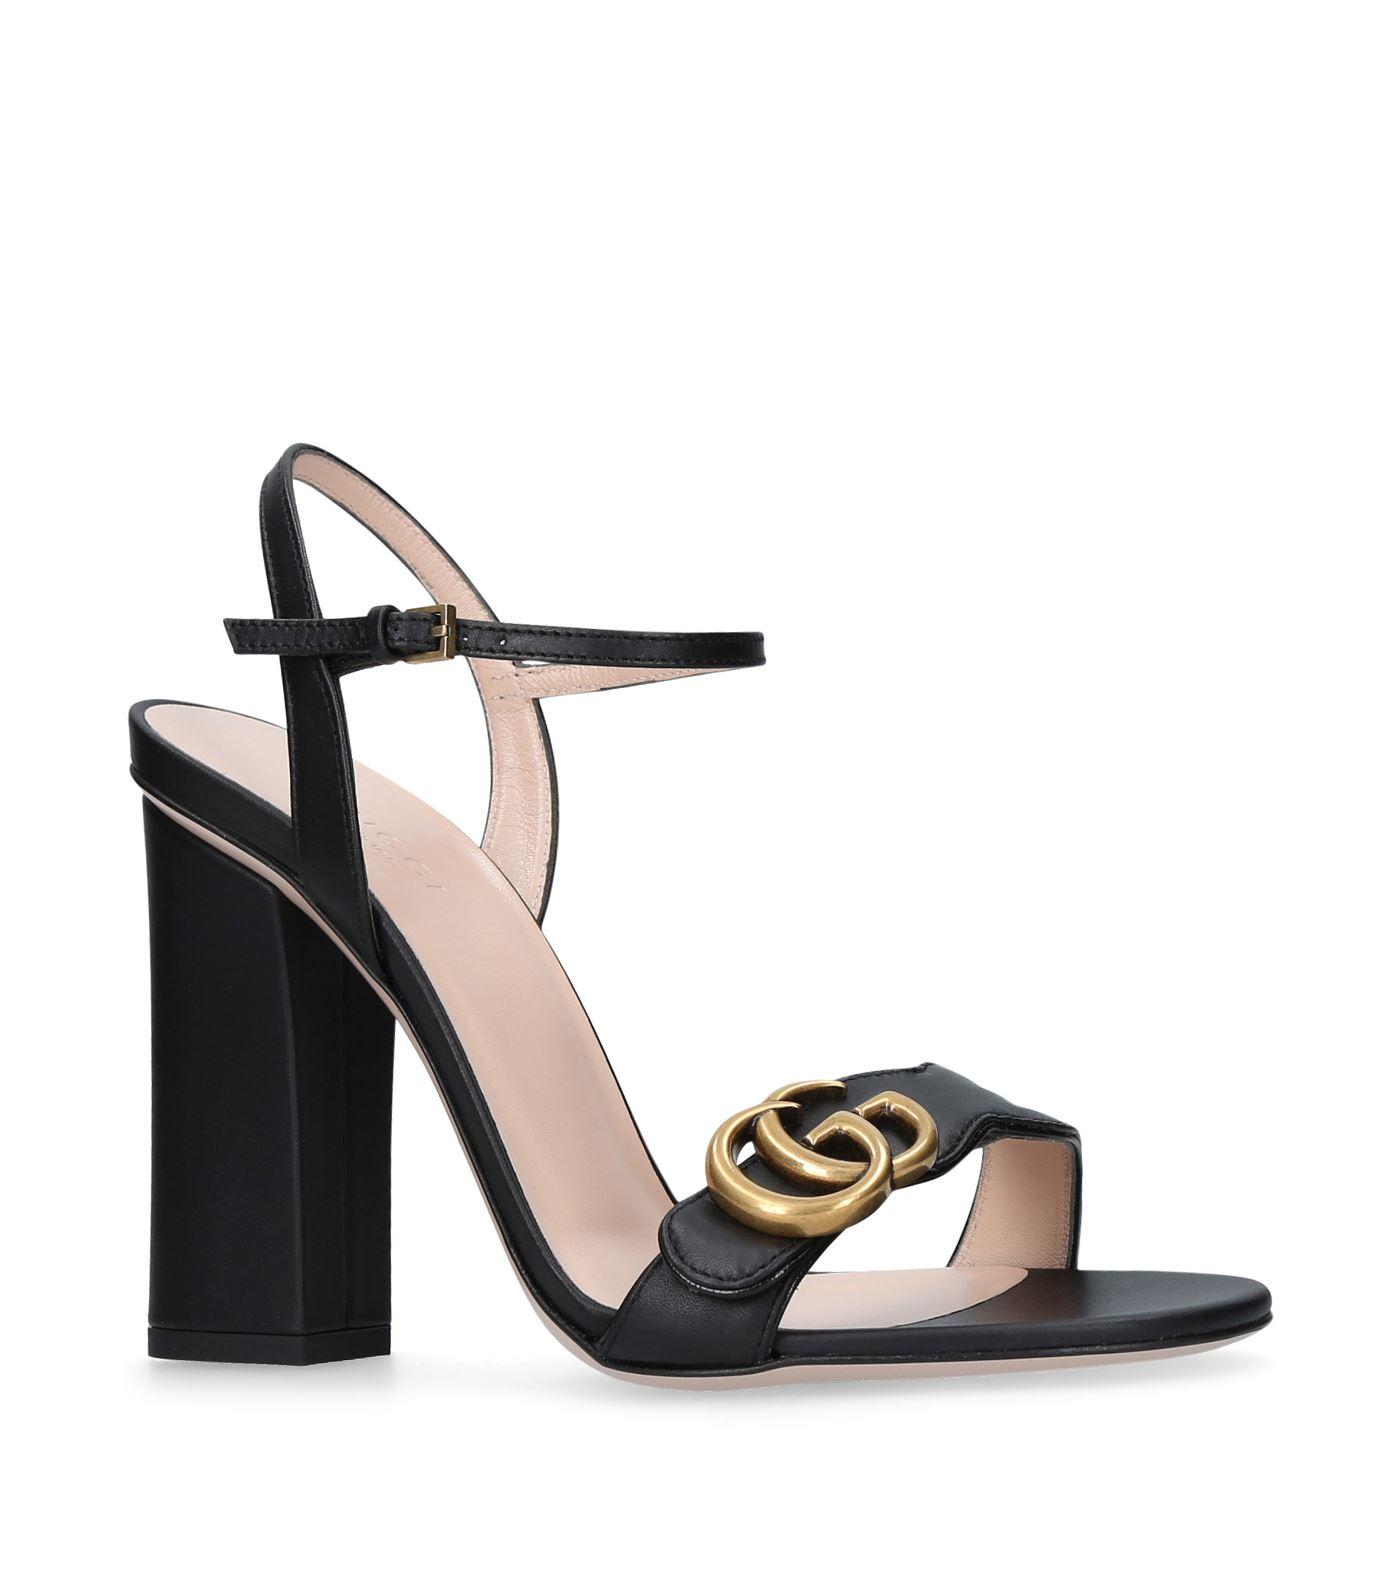 Lyst - Gucci Marmont Sandals 105 in Black - Save 18%